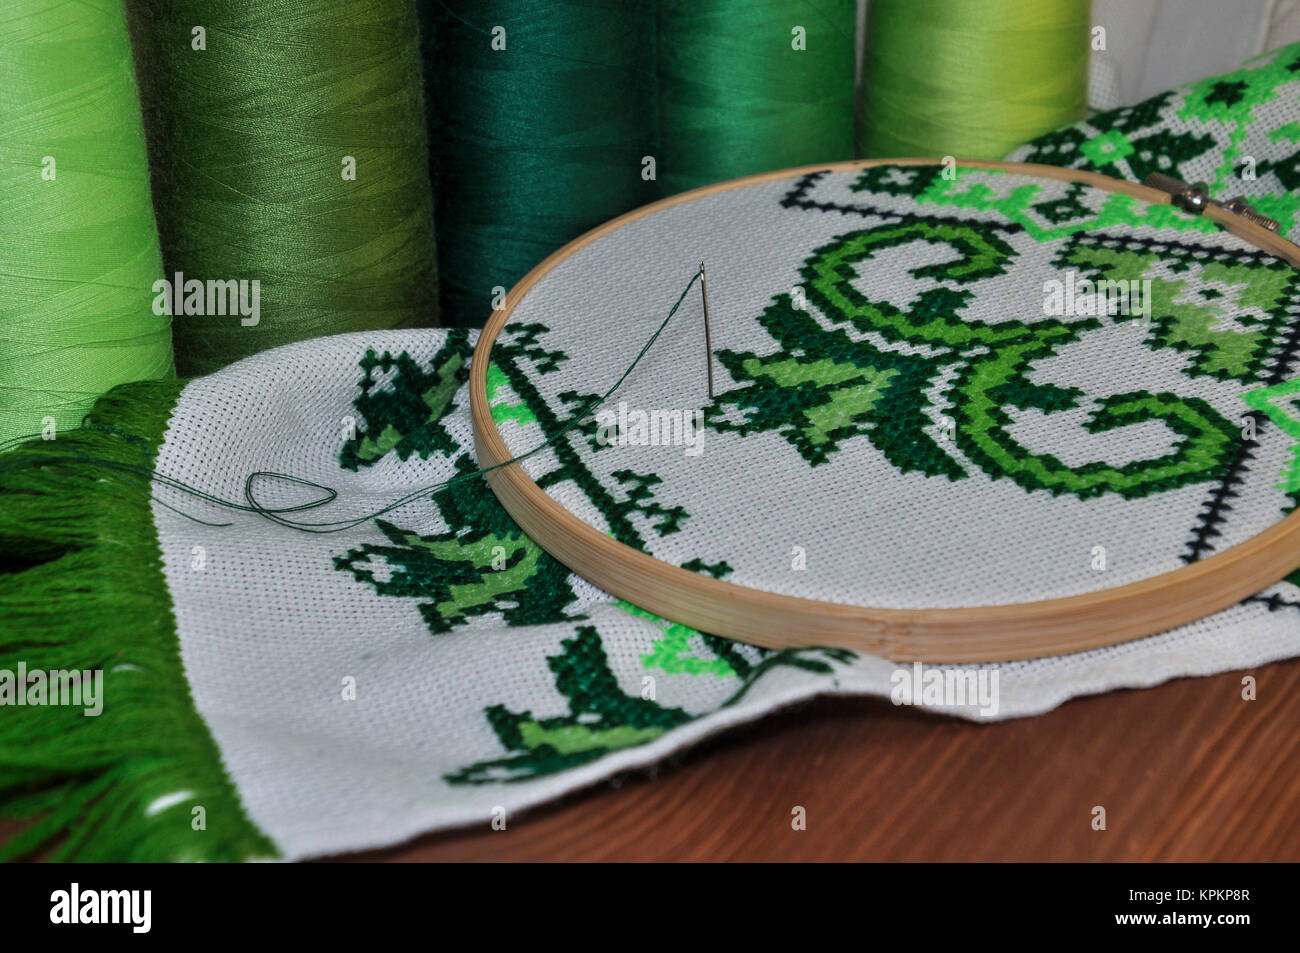 The embroidery hoop with canvas and bright sewing threads for embroidery in the table Stock Photo